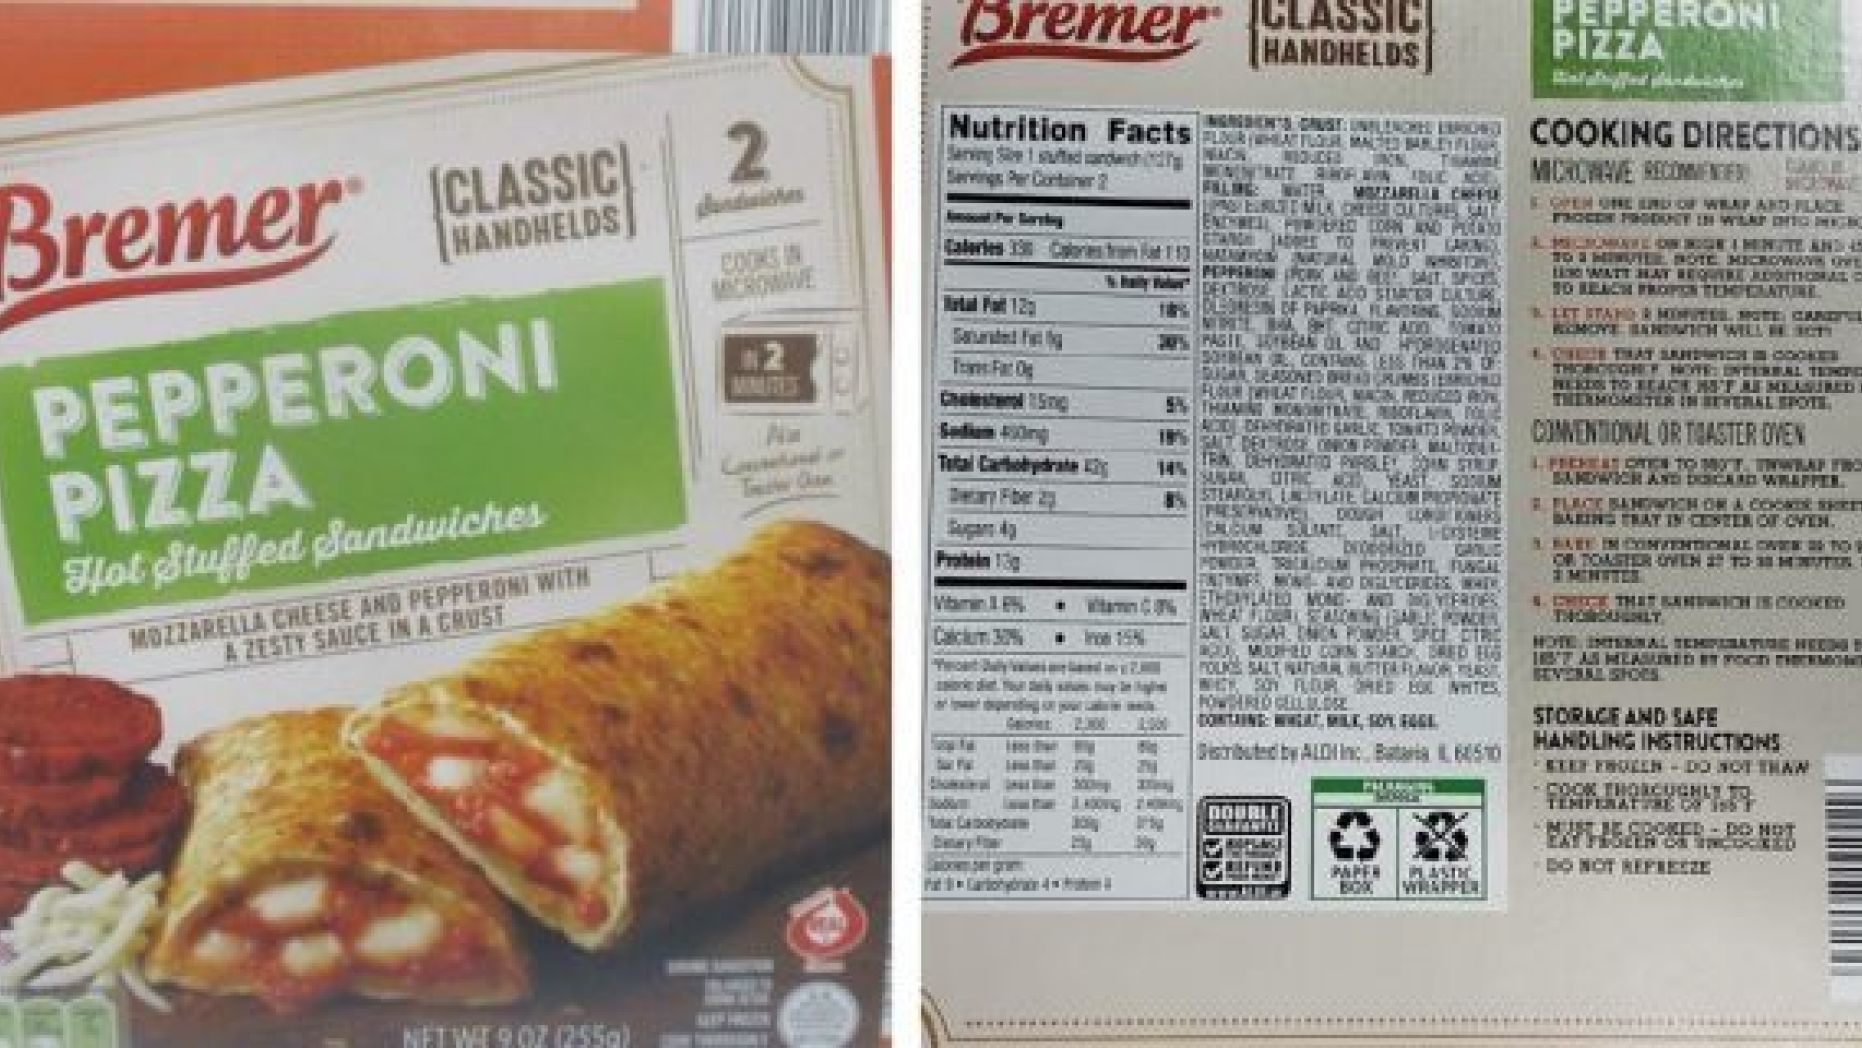 Approximately 56,578 pounds of stuffed sandwiches have been recalled because they are reportedly contaminated by semi-transparent plastic, according to the Food Safety and Inspection Service (FSIS).